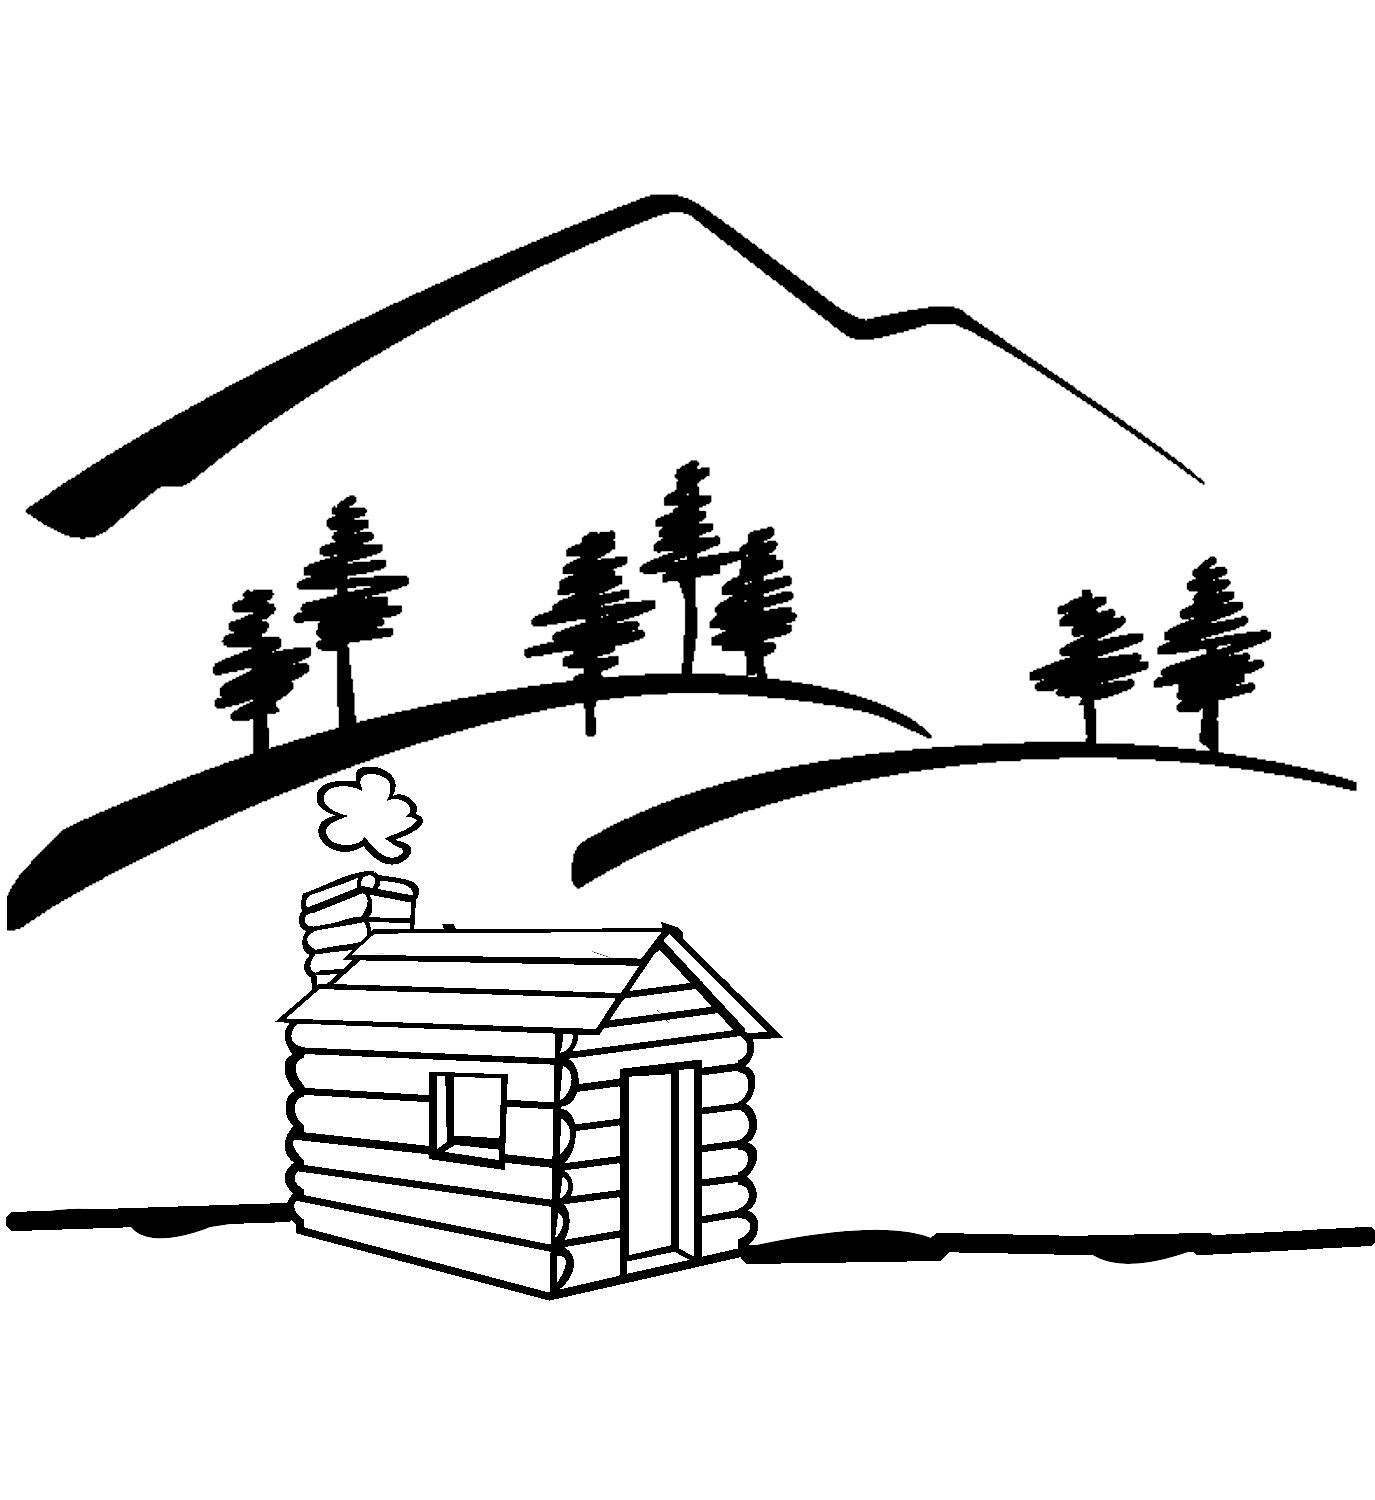 Free Cabin Cliparts, Download Free Clip Art, Free Clip Art on.